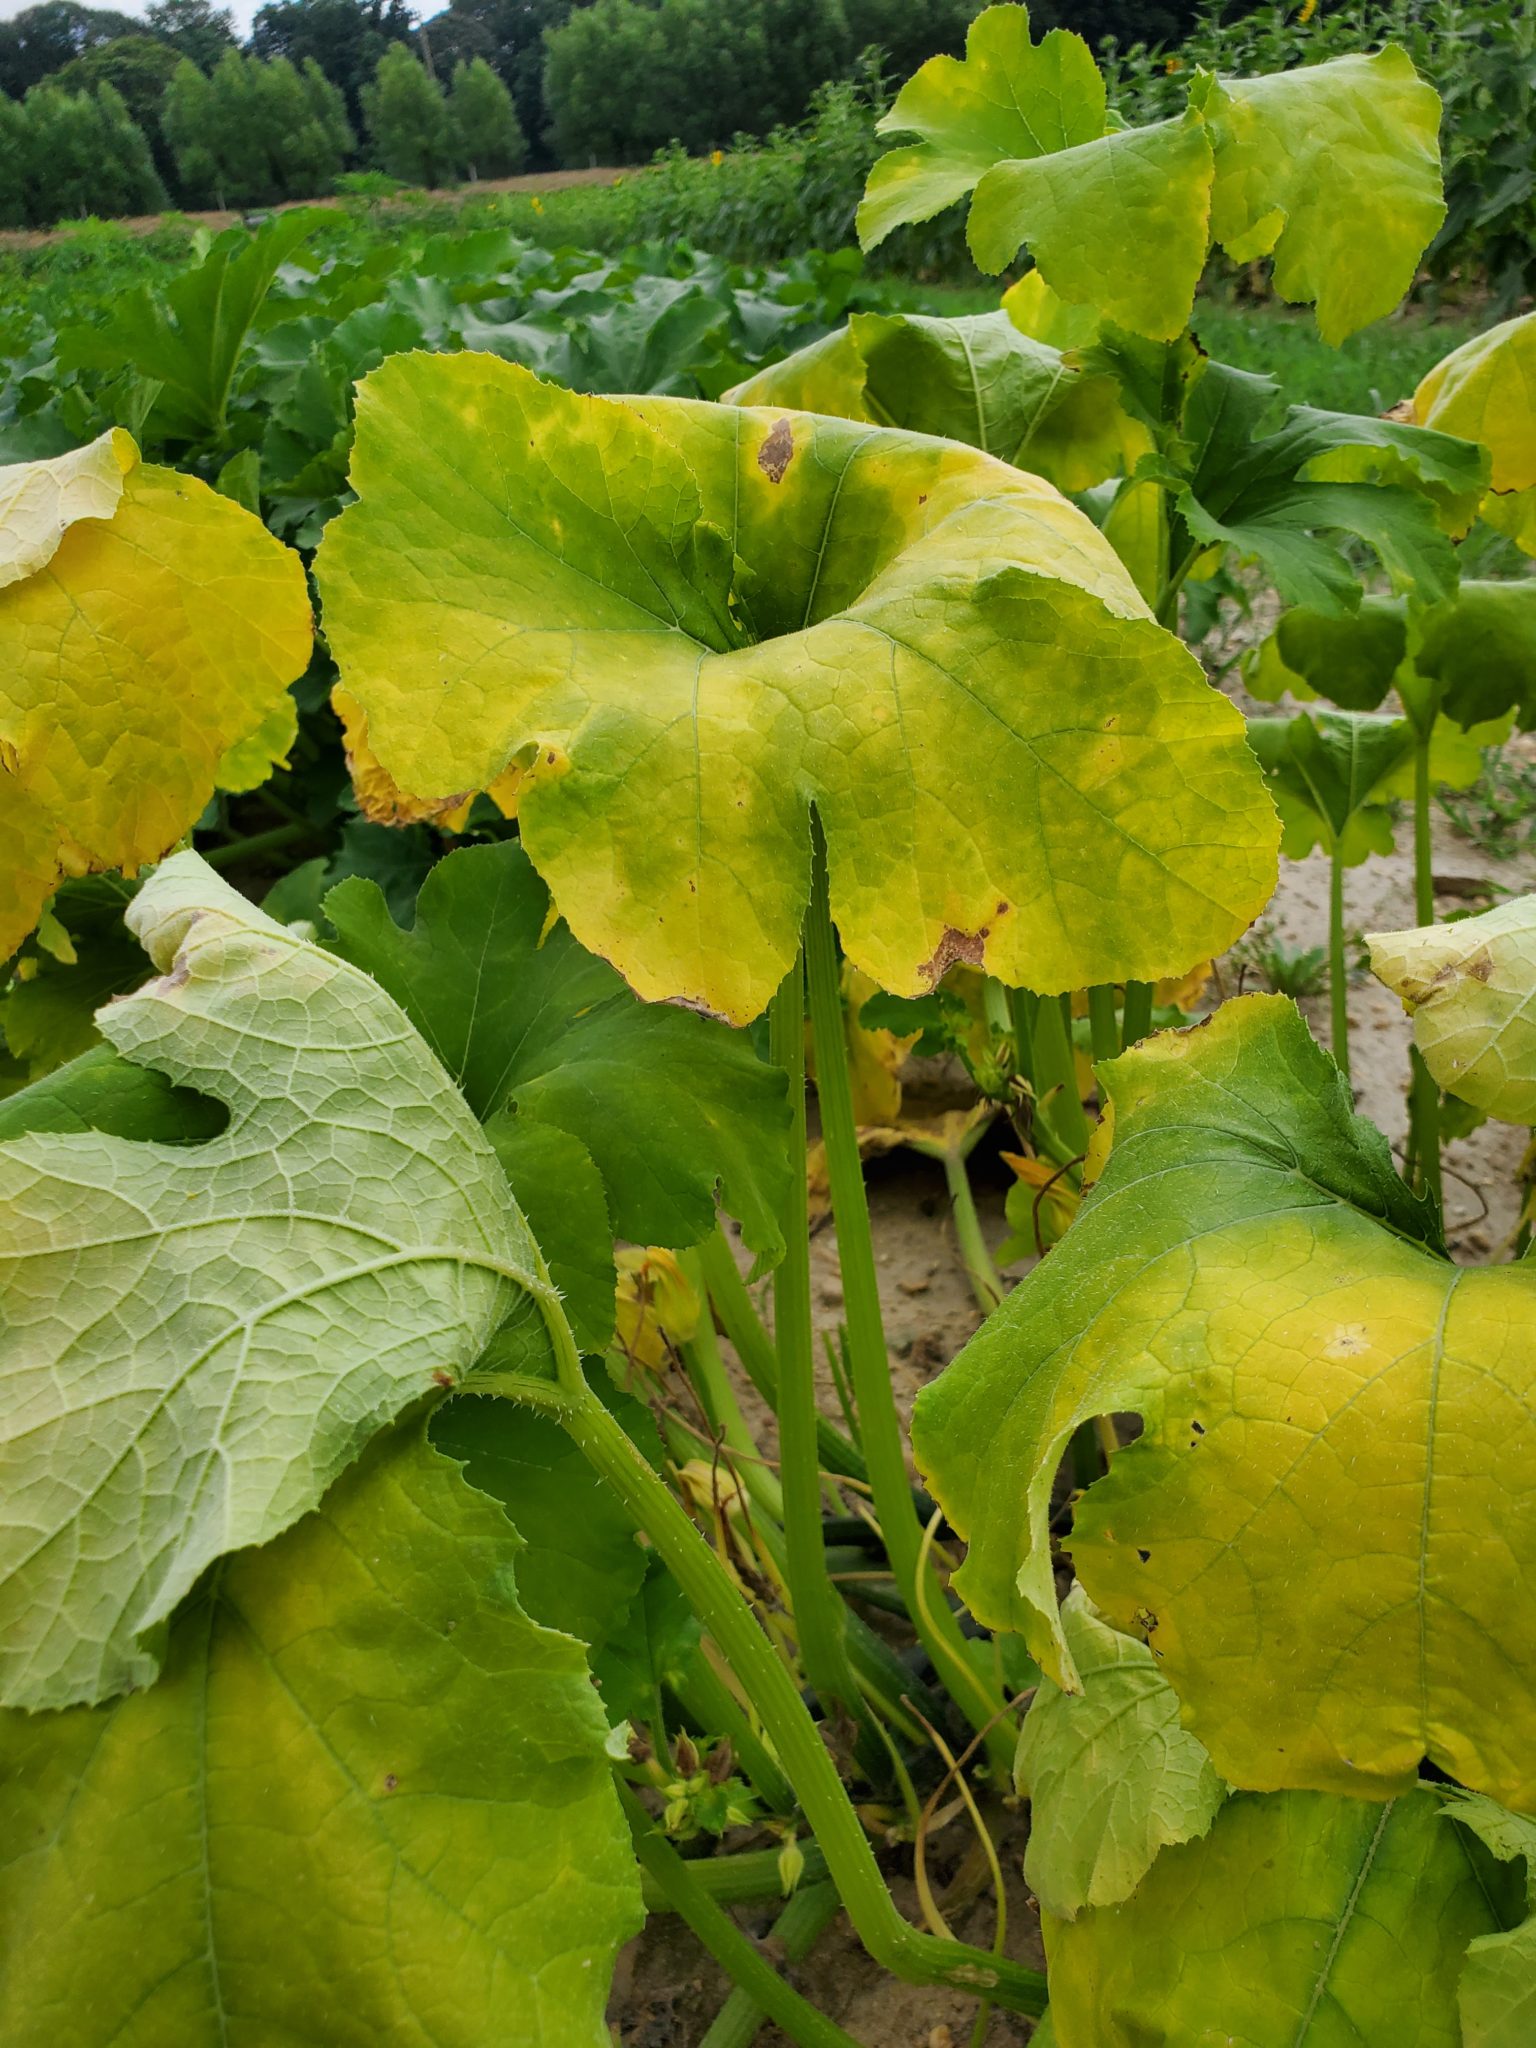 symptoms-of-bacterial-wilt-on-pumpkin-note-the-bright-yellowing-of